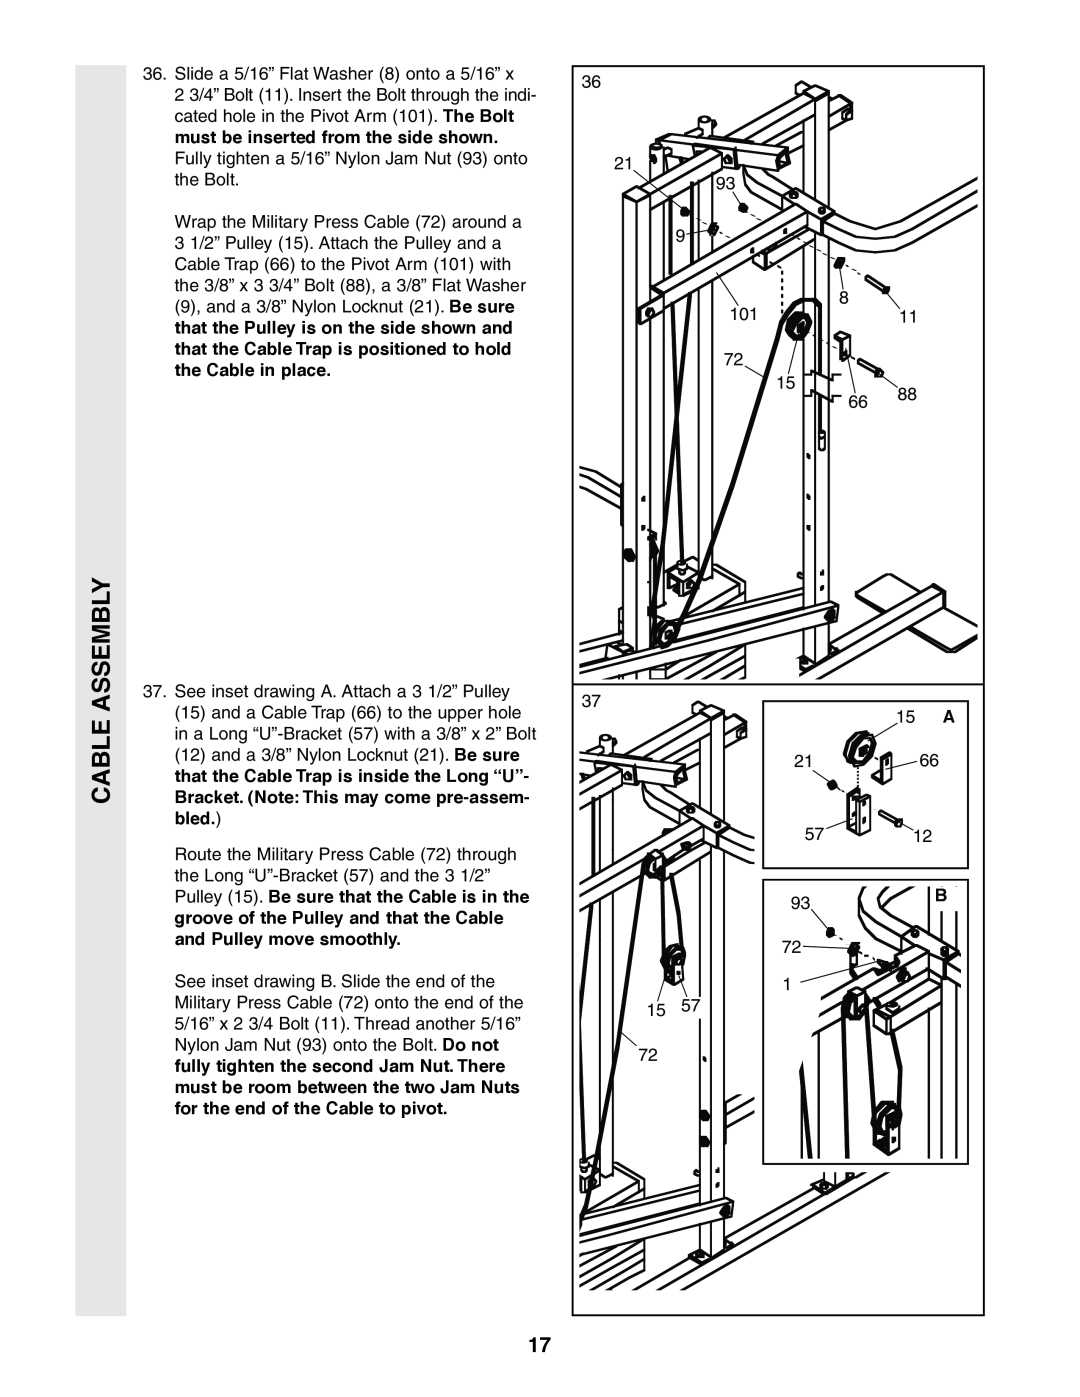 Weider 831.159380 must be inserted from the side shown, that the Pulley is on the side shown and, the Cable in place 